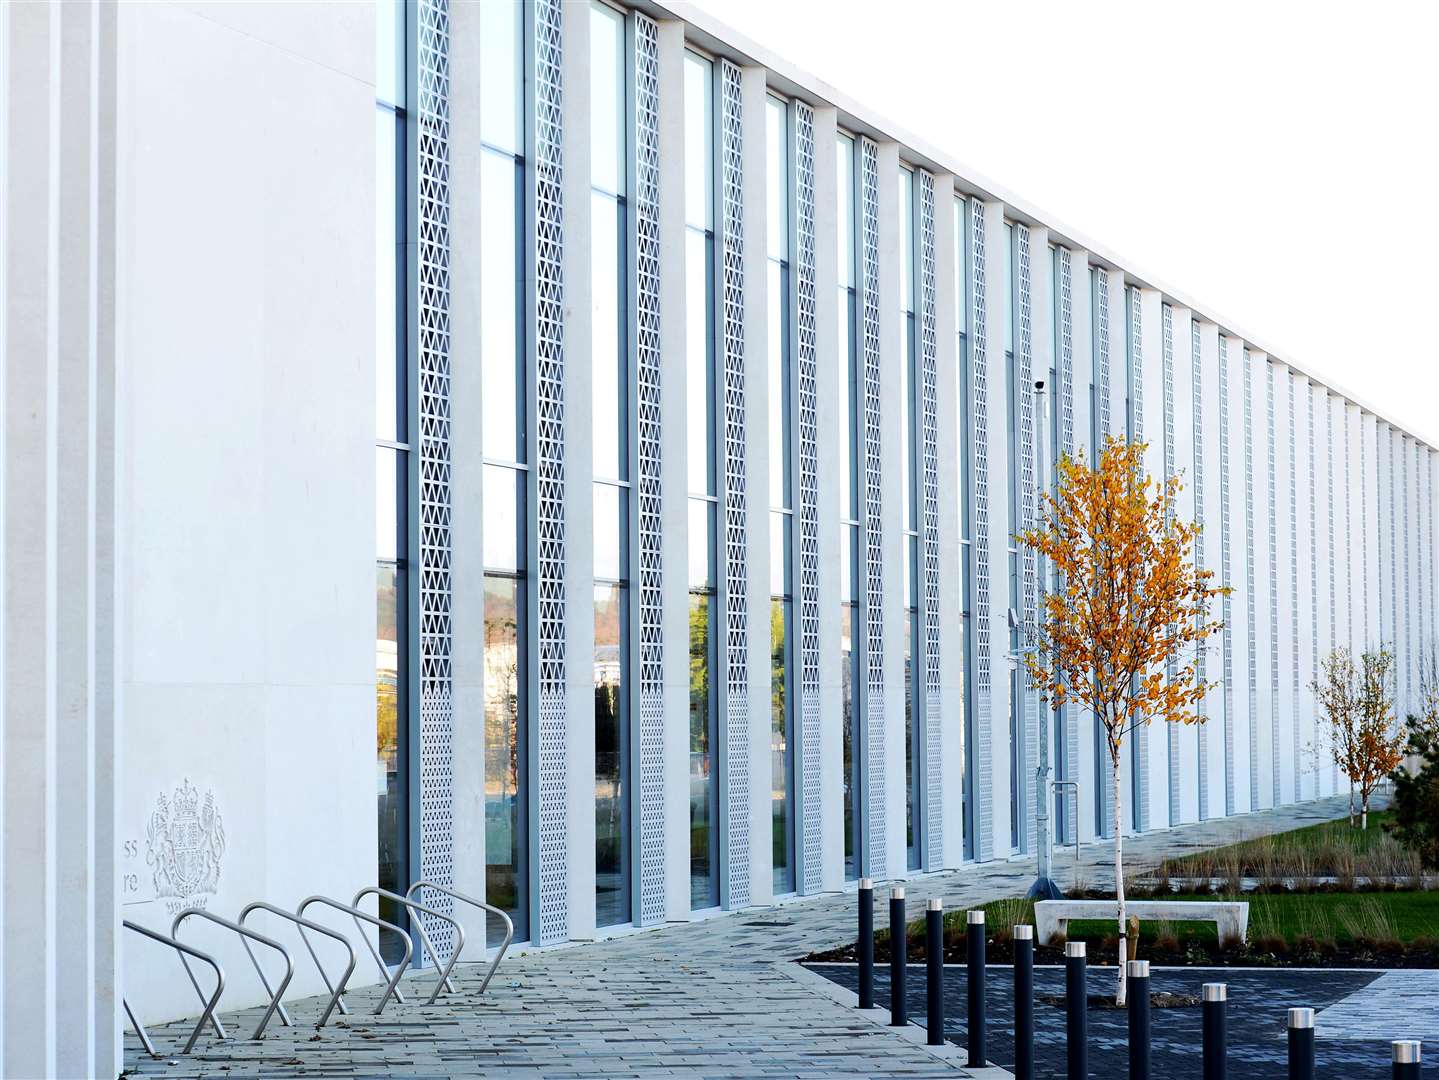 The Inverness Justice Centre.